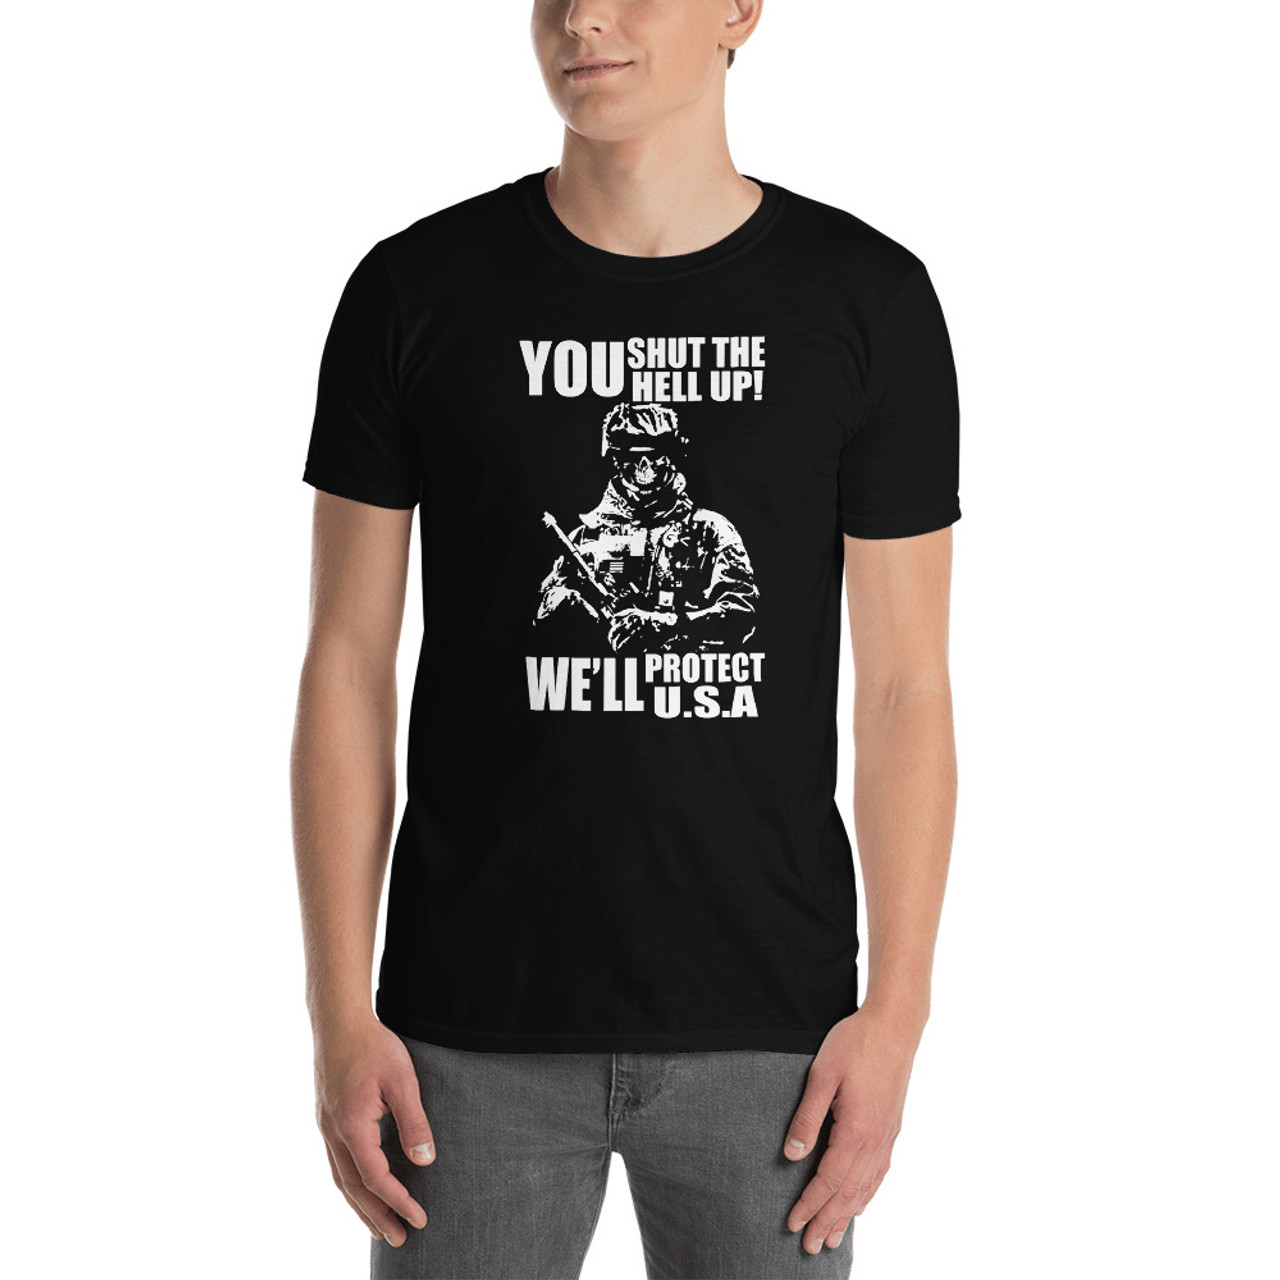 We'll Protect Short-Sleeve Unisex T-Shirt - Meach's Military ...